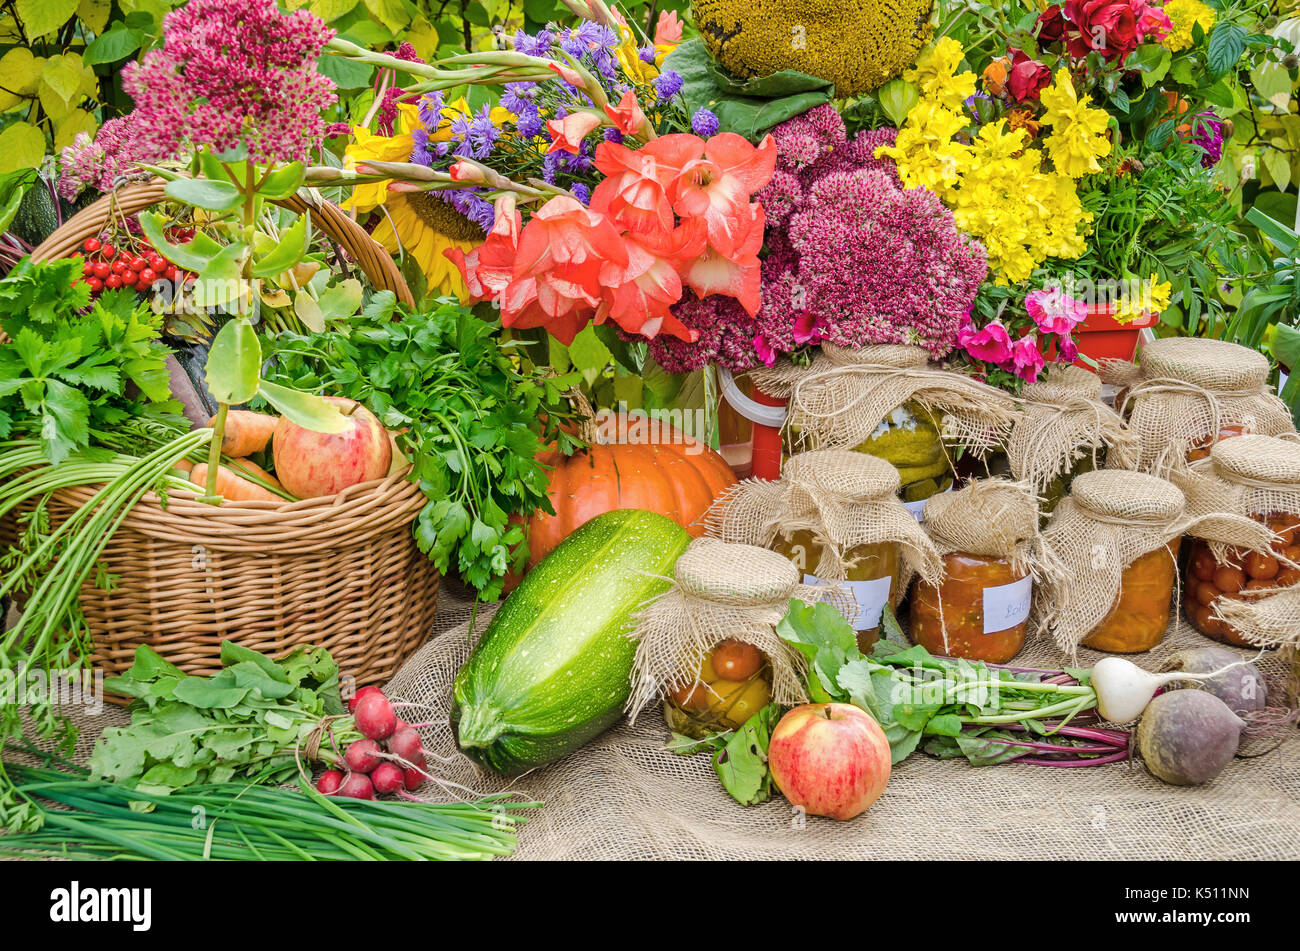 Apples, radish, carrots, pickled vegetables, pumpkins and a variety of different kind of flowers presented at the harvest festival Stock Photo